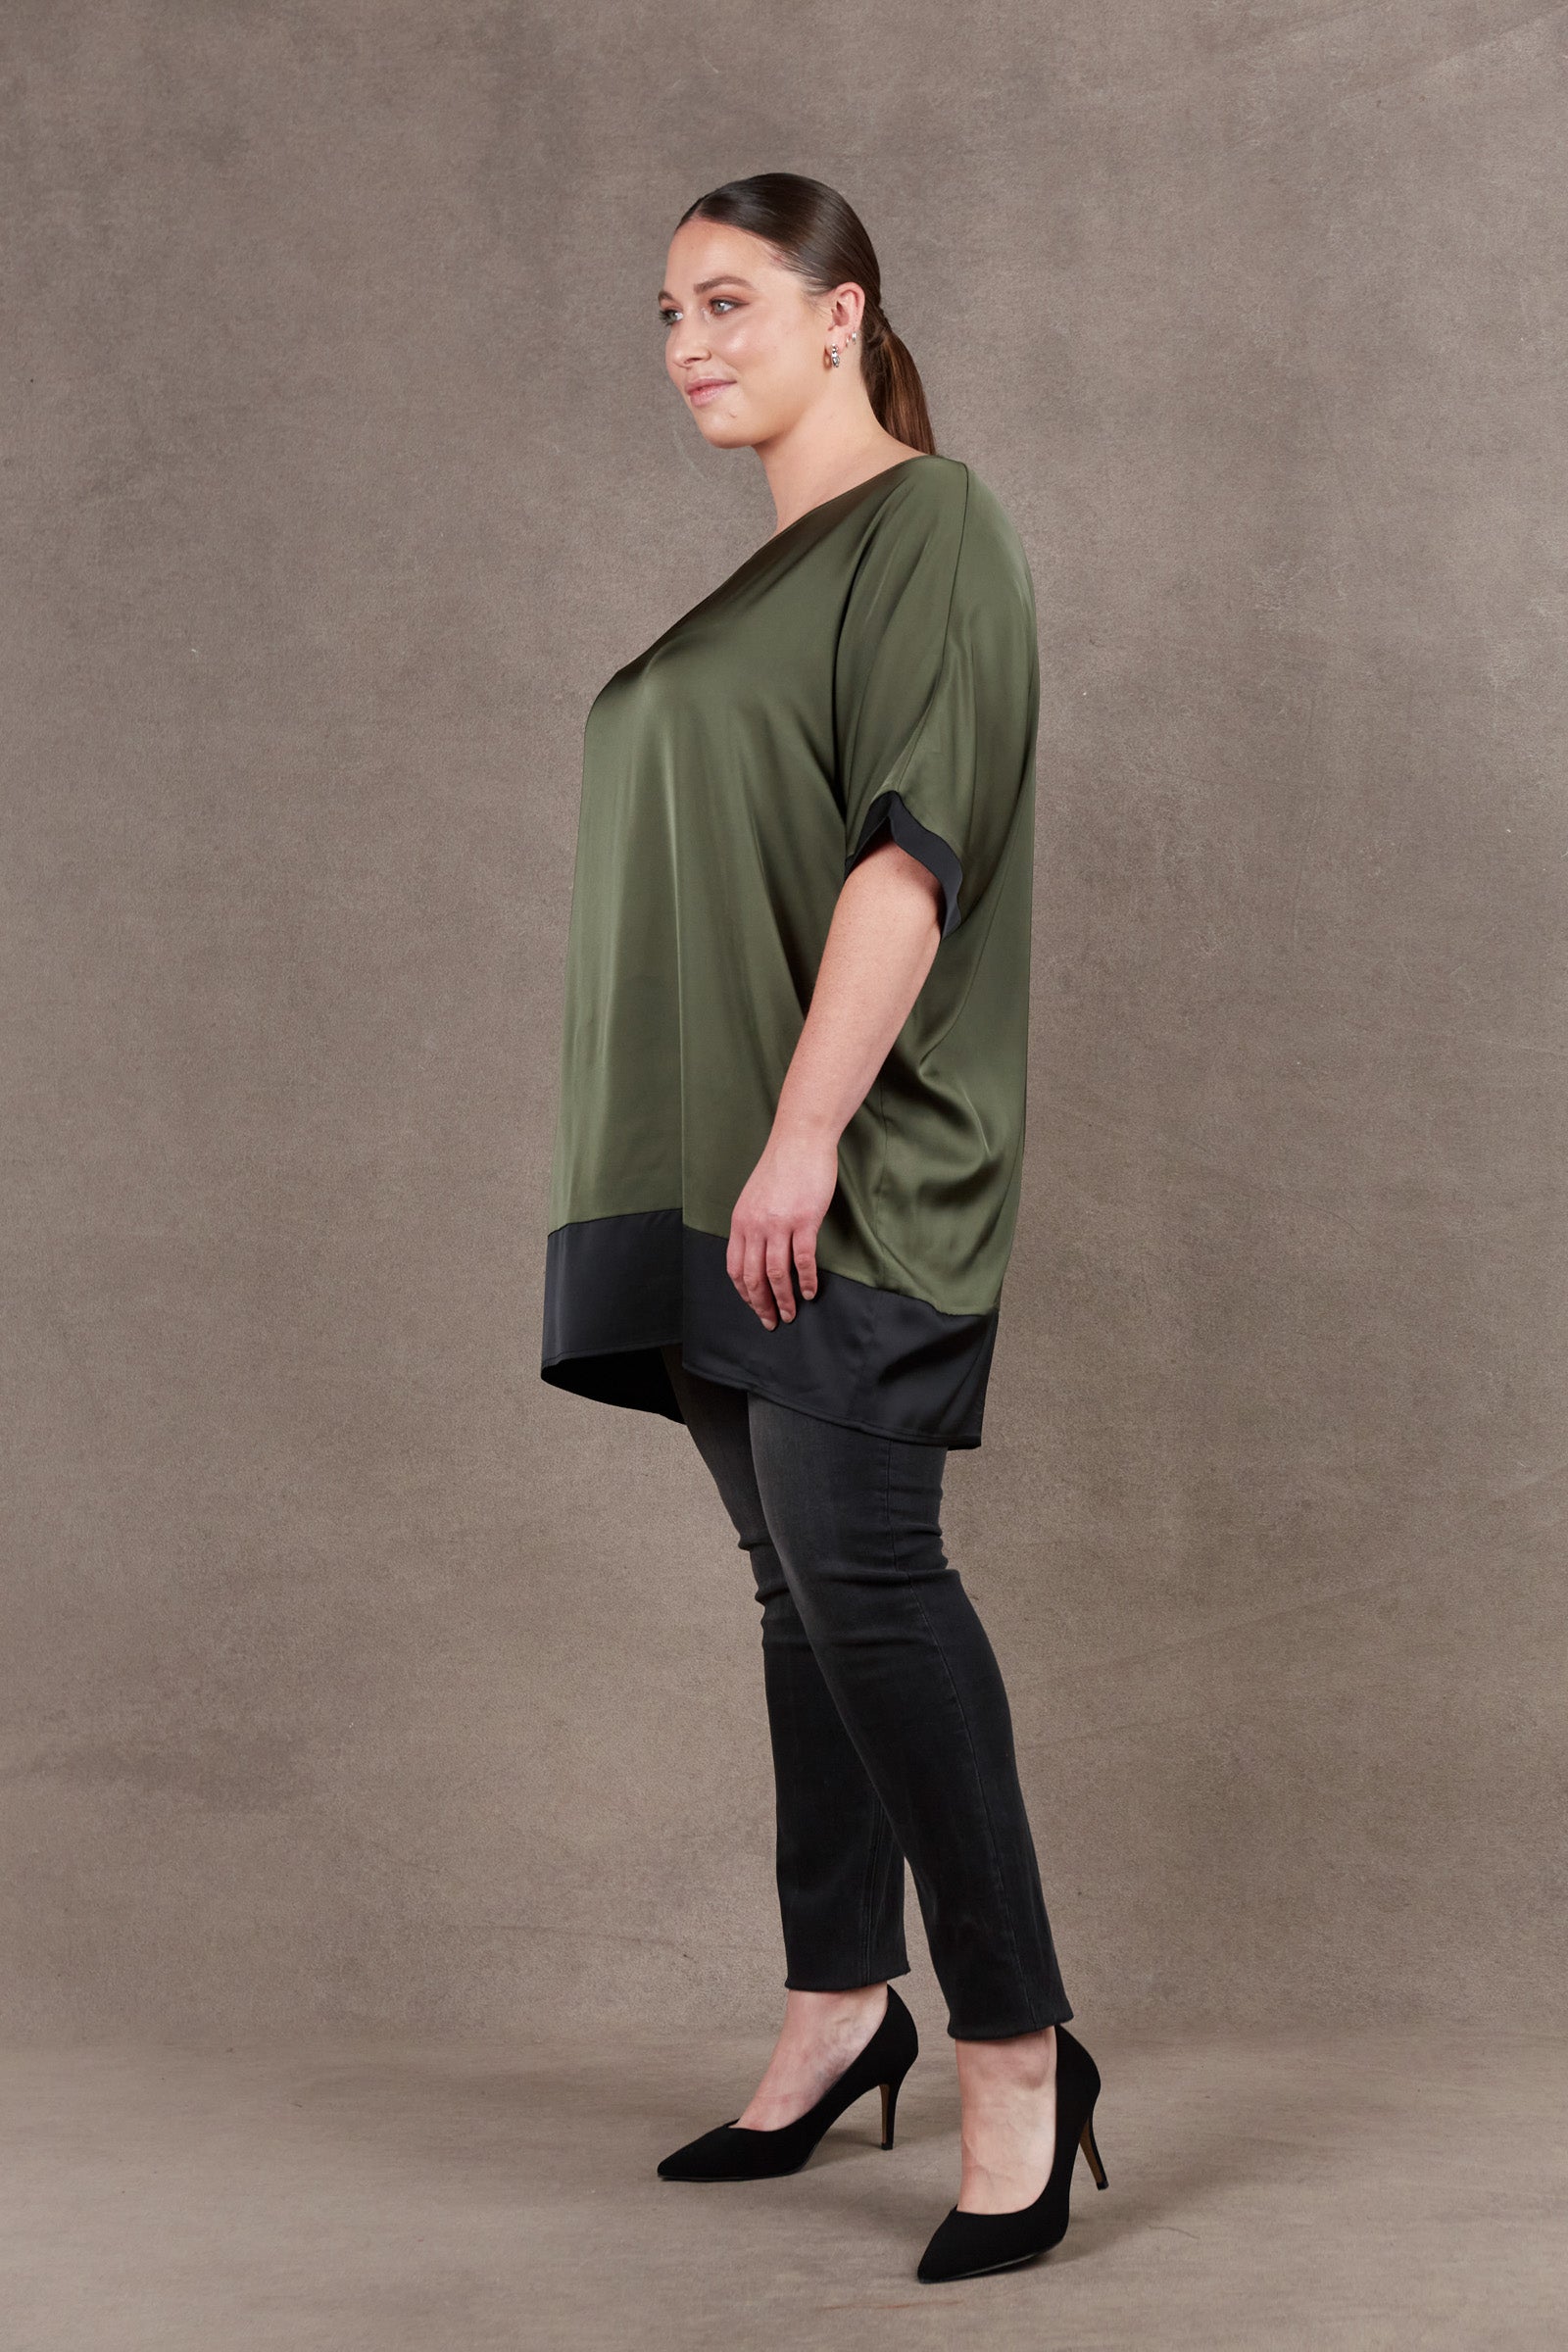 Norse Relax Top - Aspen - eb&ive Clothing - Top One Size Dressy